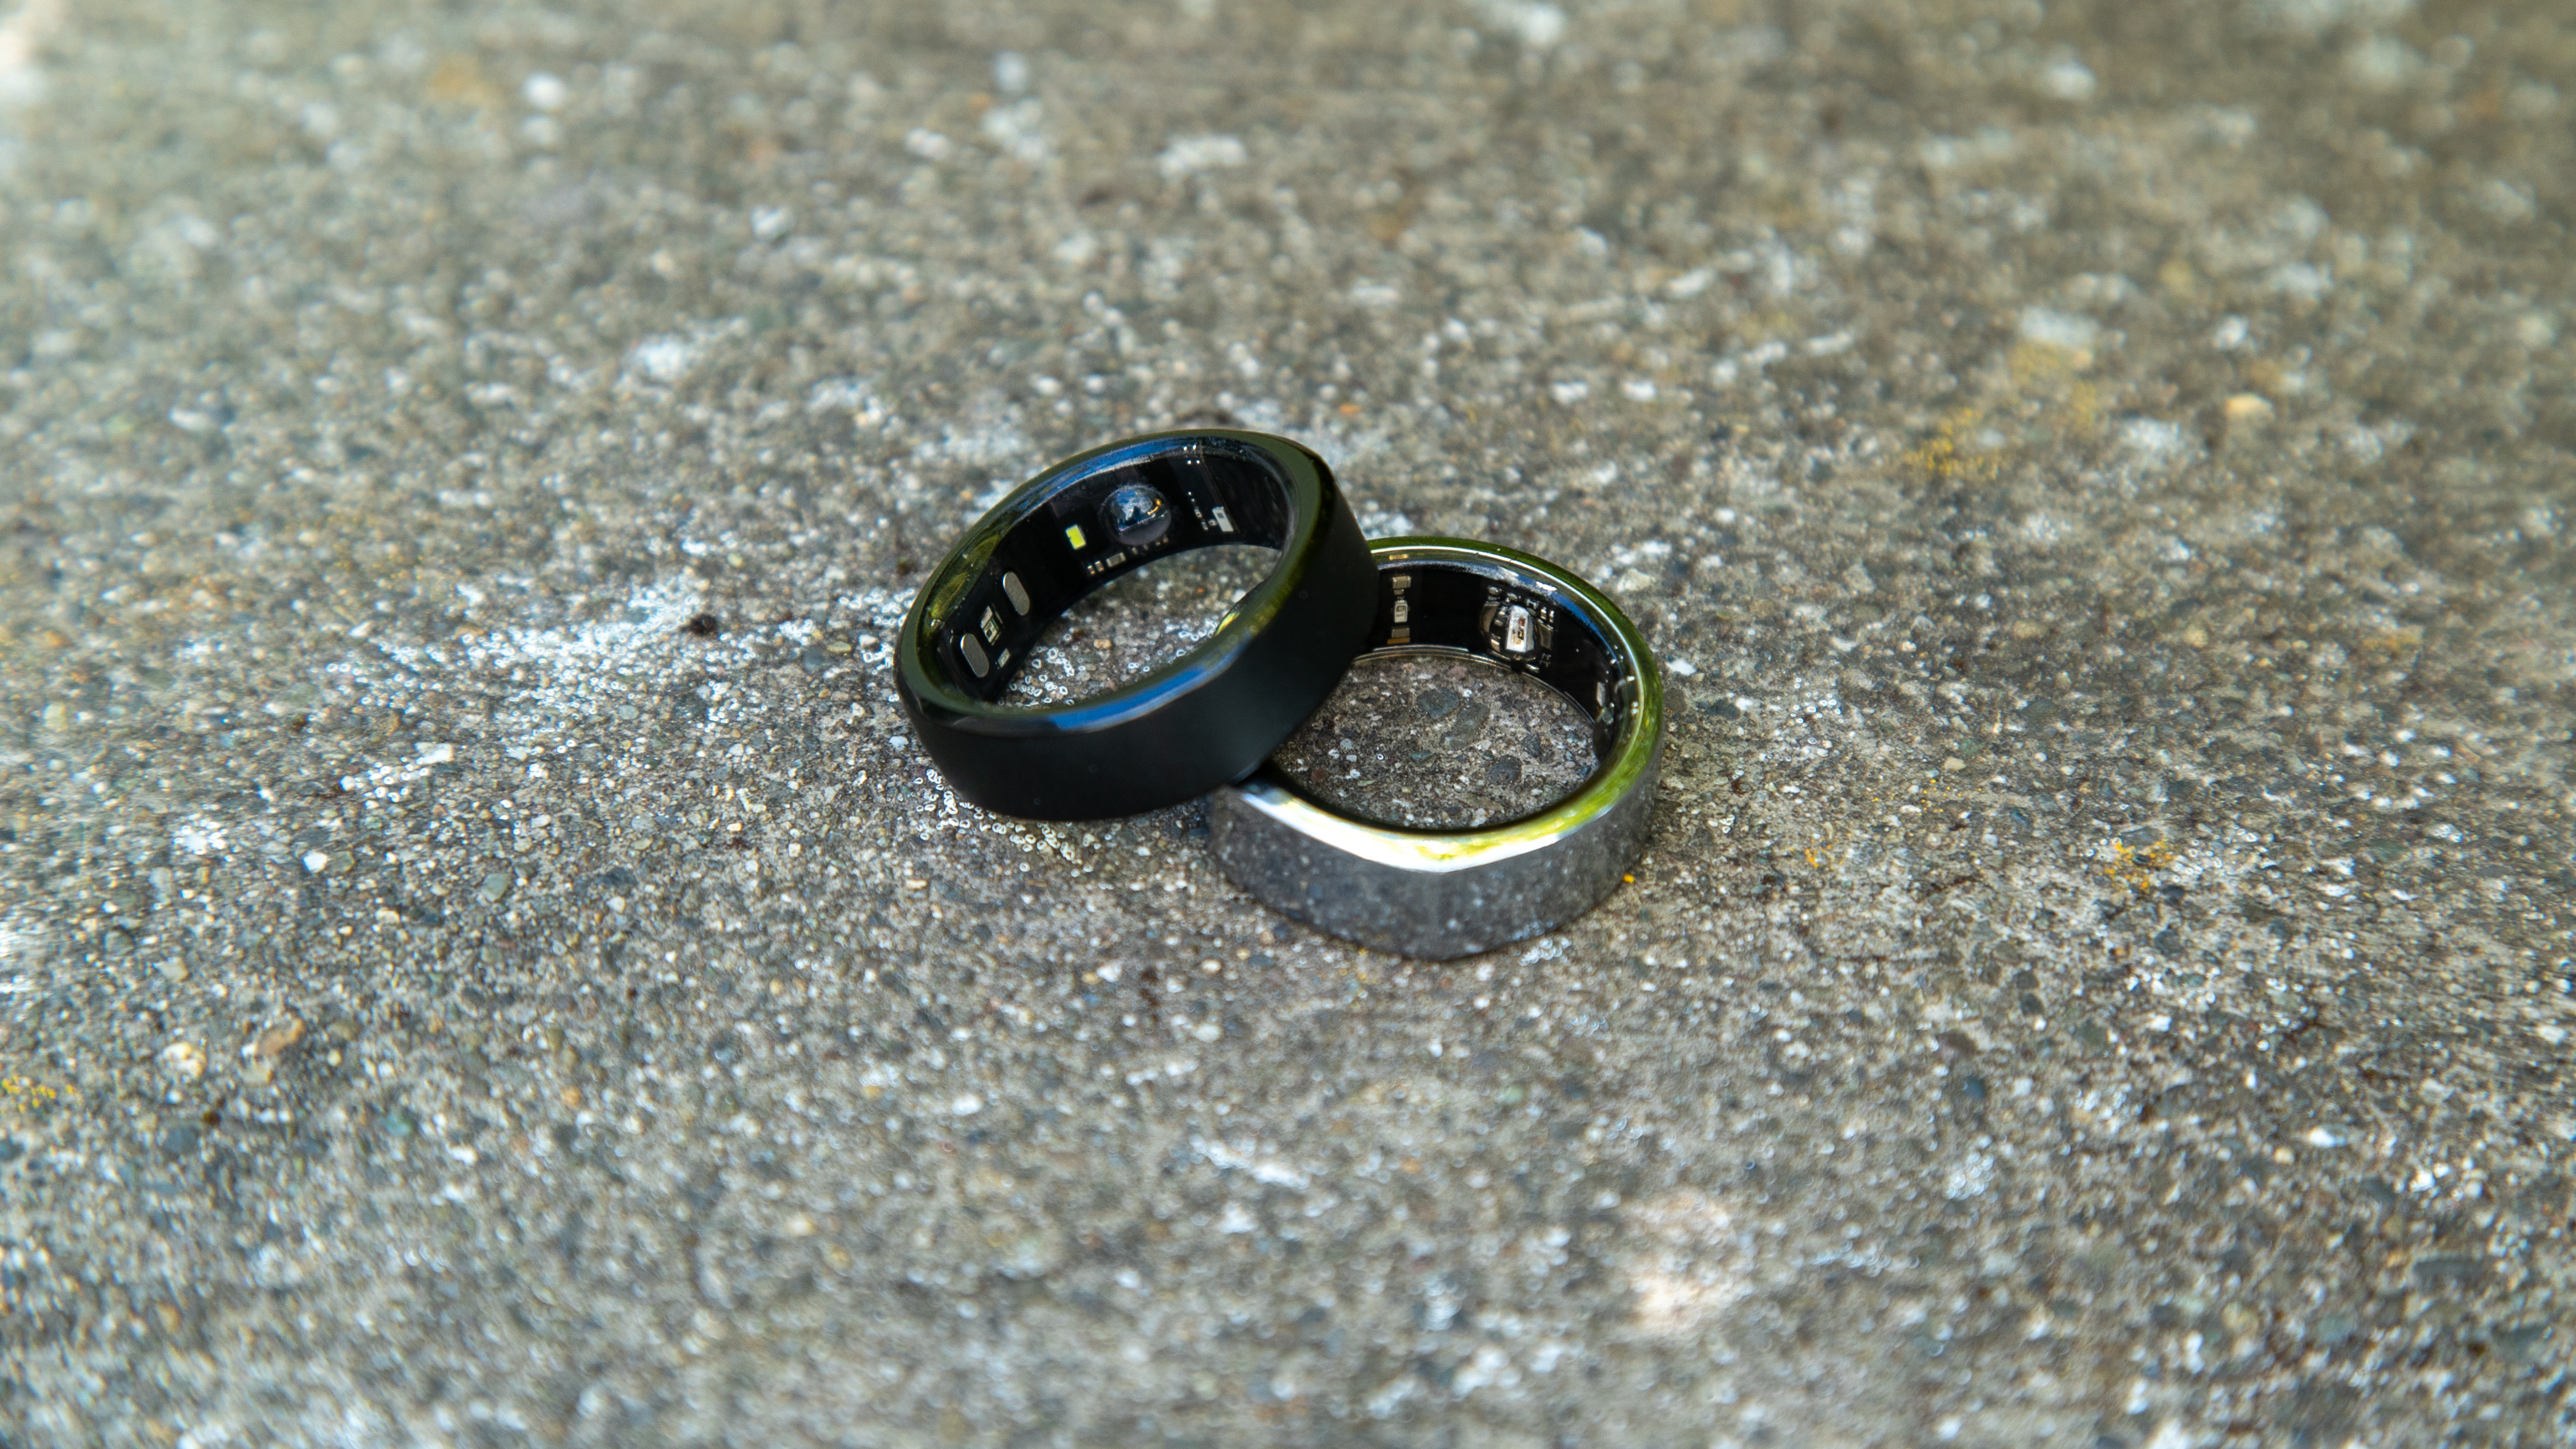 The RingConn Smart Ring and Oura Ring Gen 3